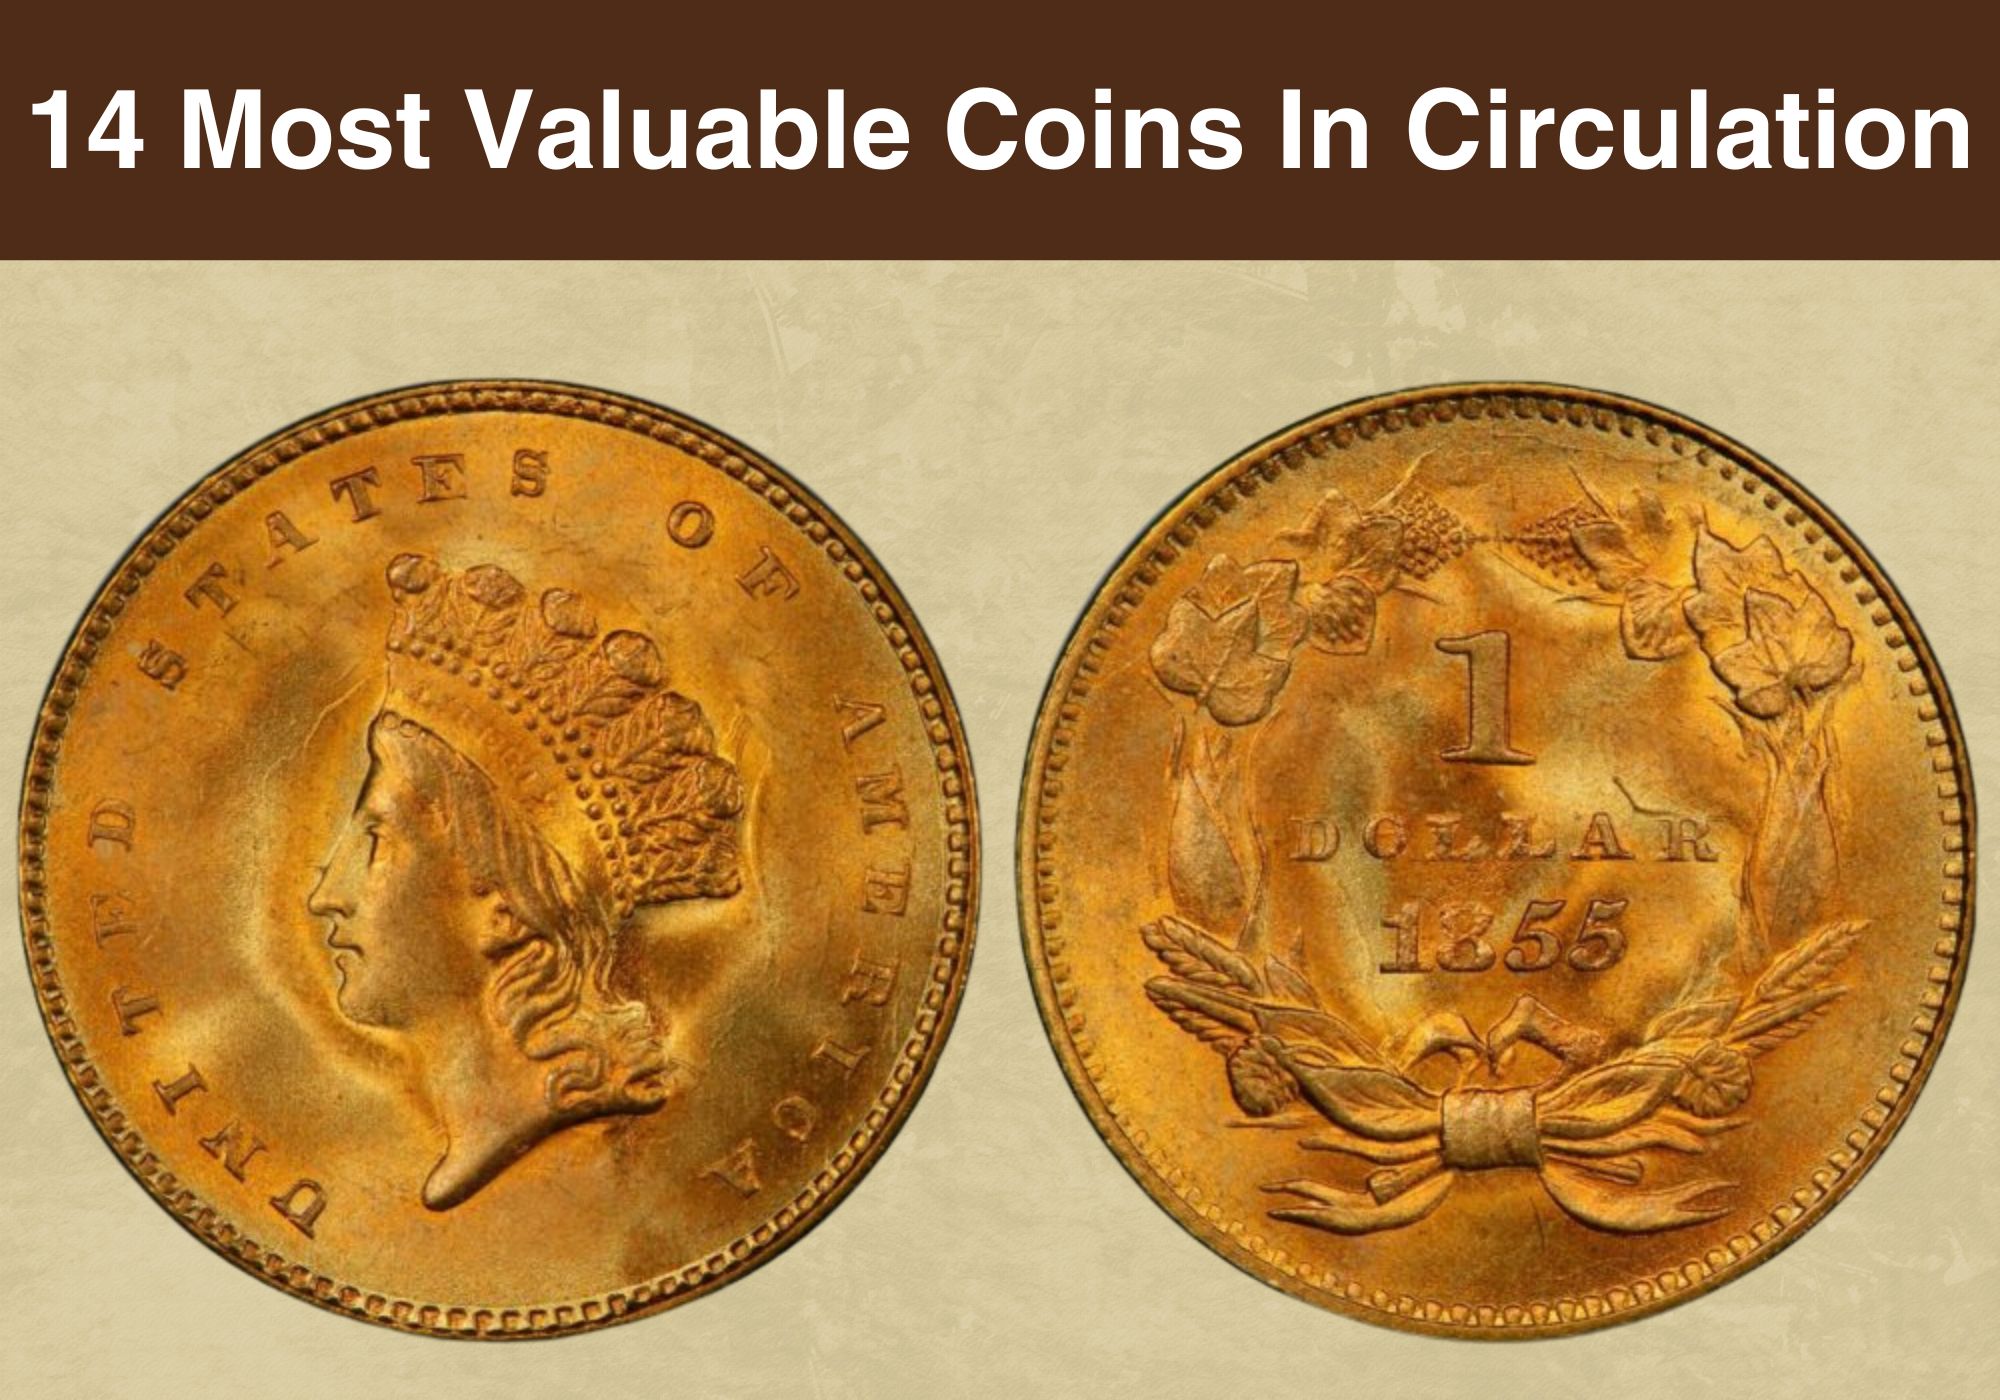 14 Most Valuable Coins In Circulation